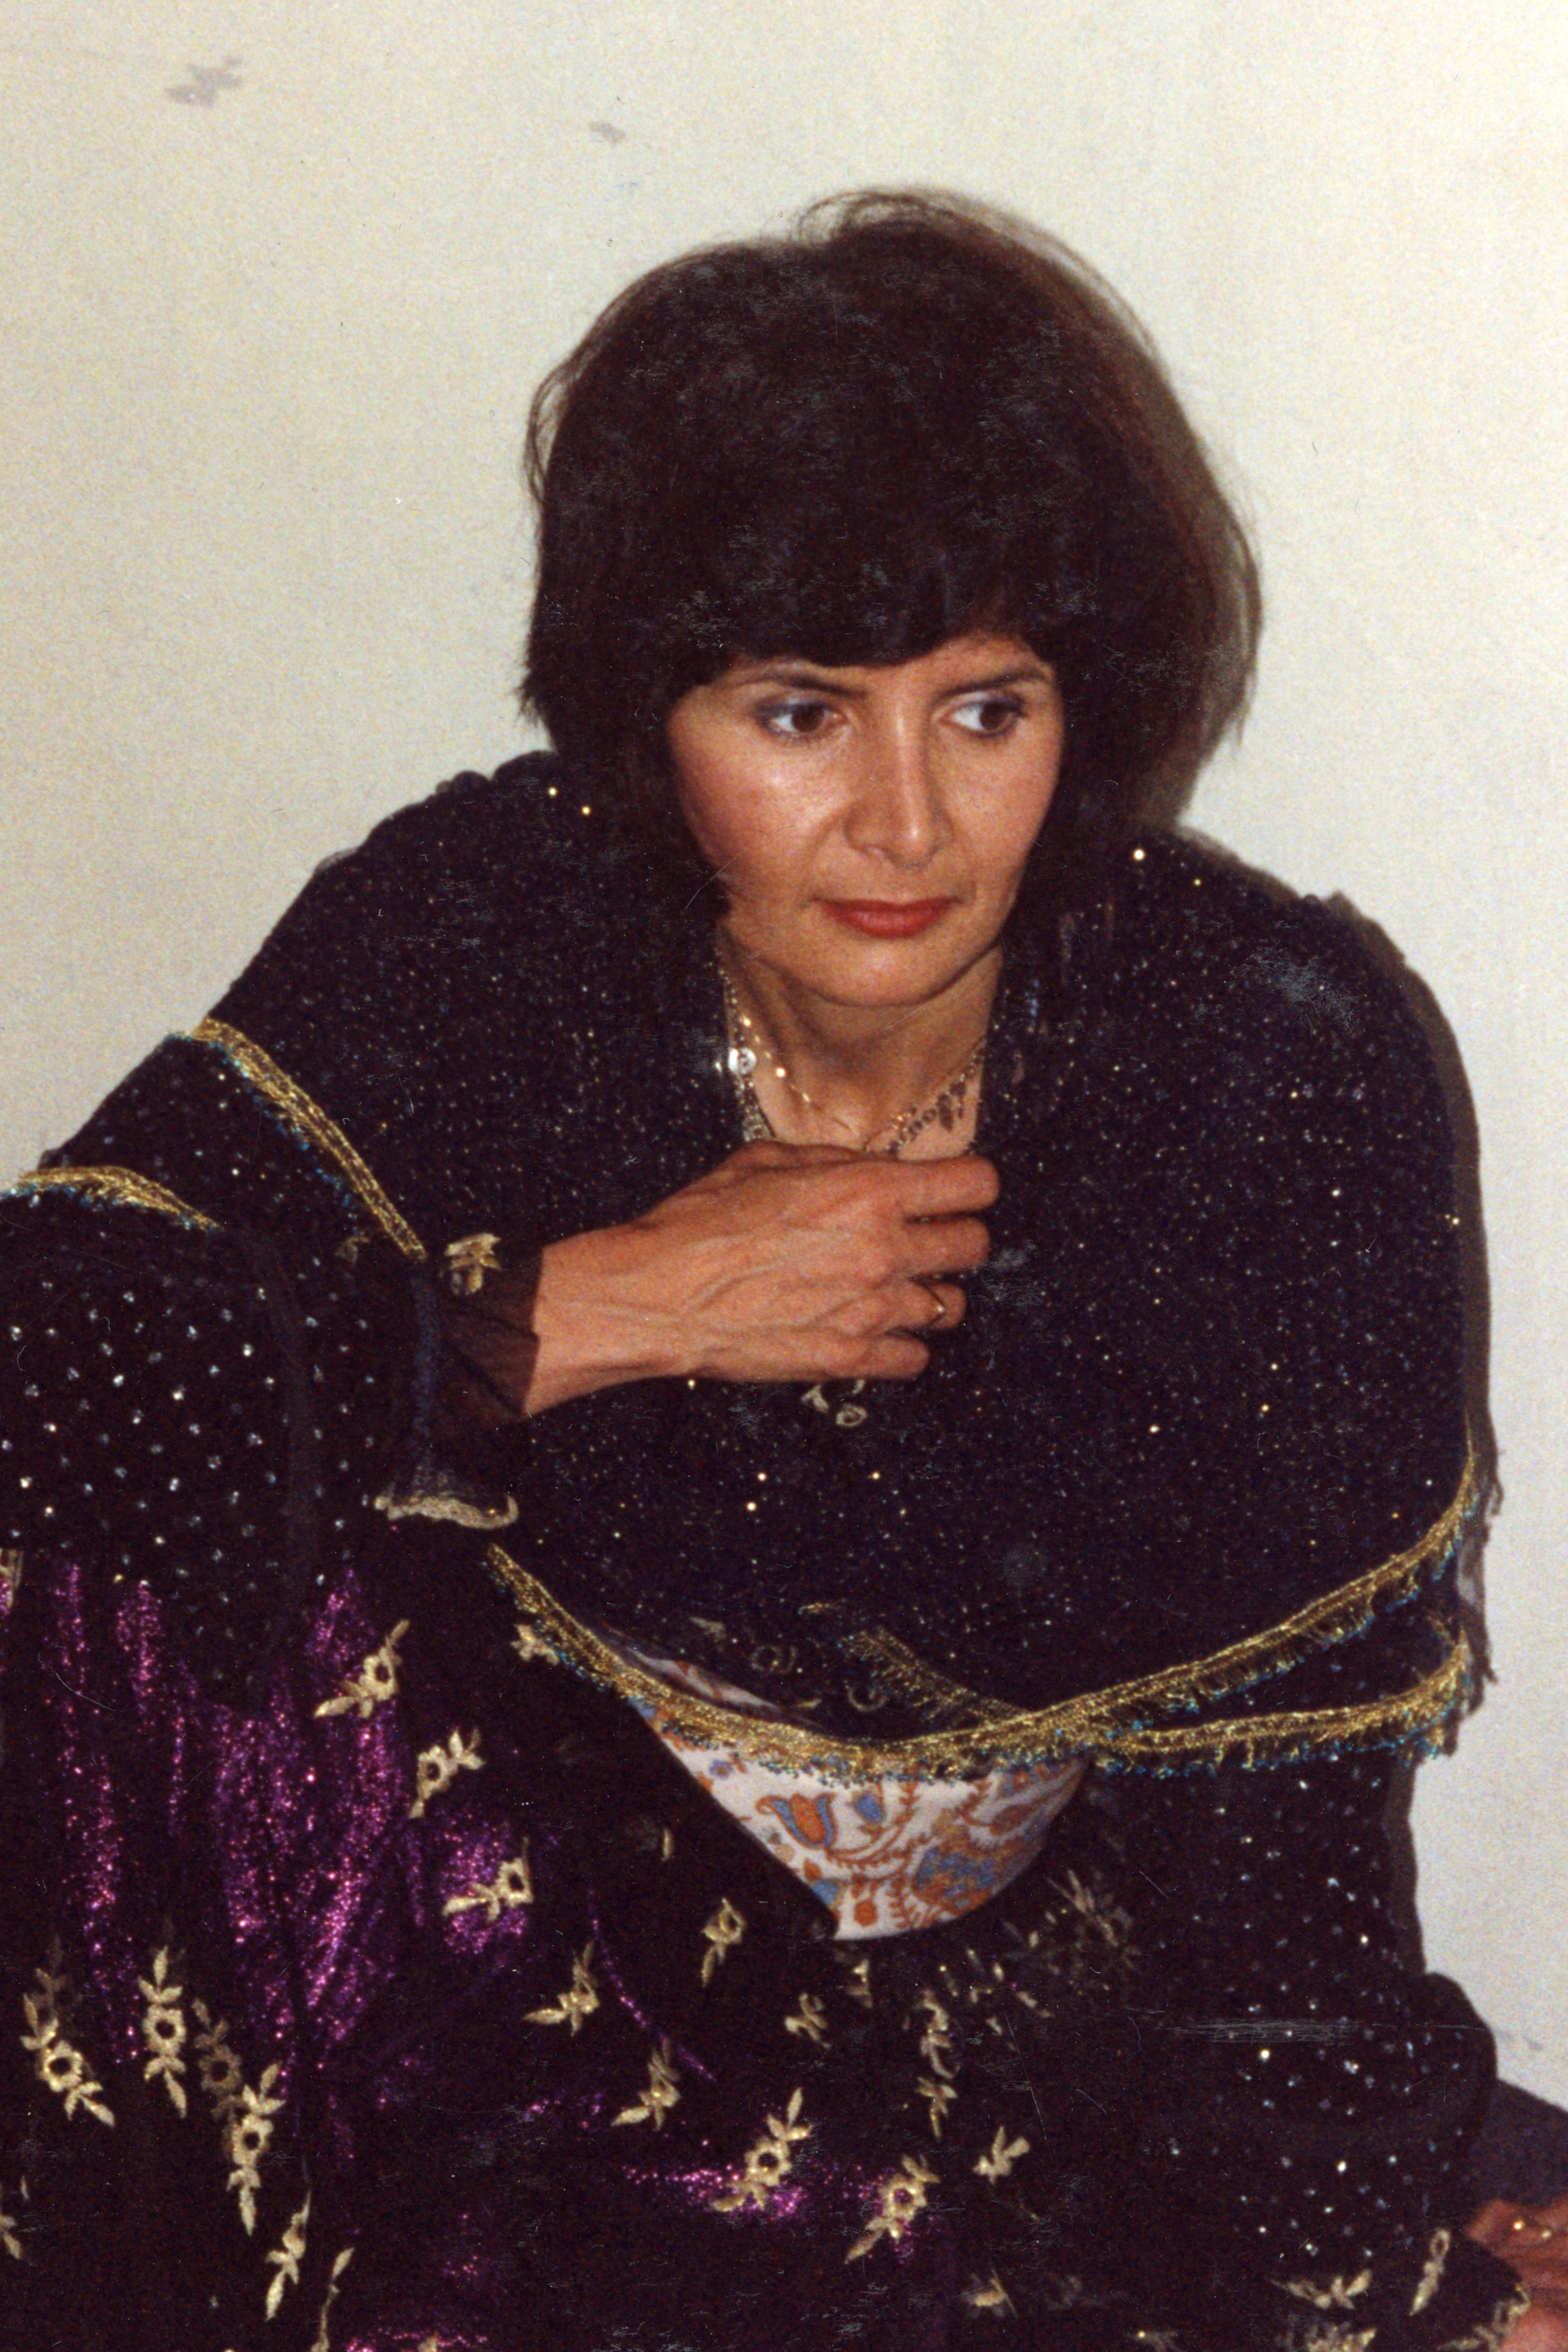 A photo of Mína Norlin at that time from a trip to Kurdistan, summer 1990